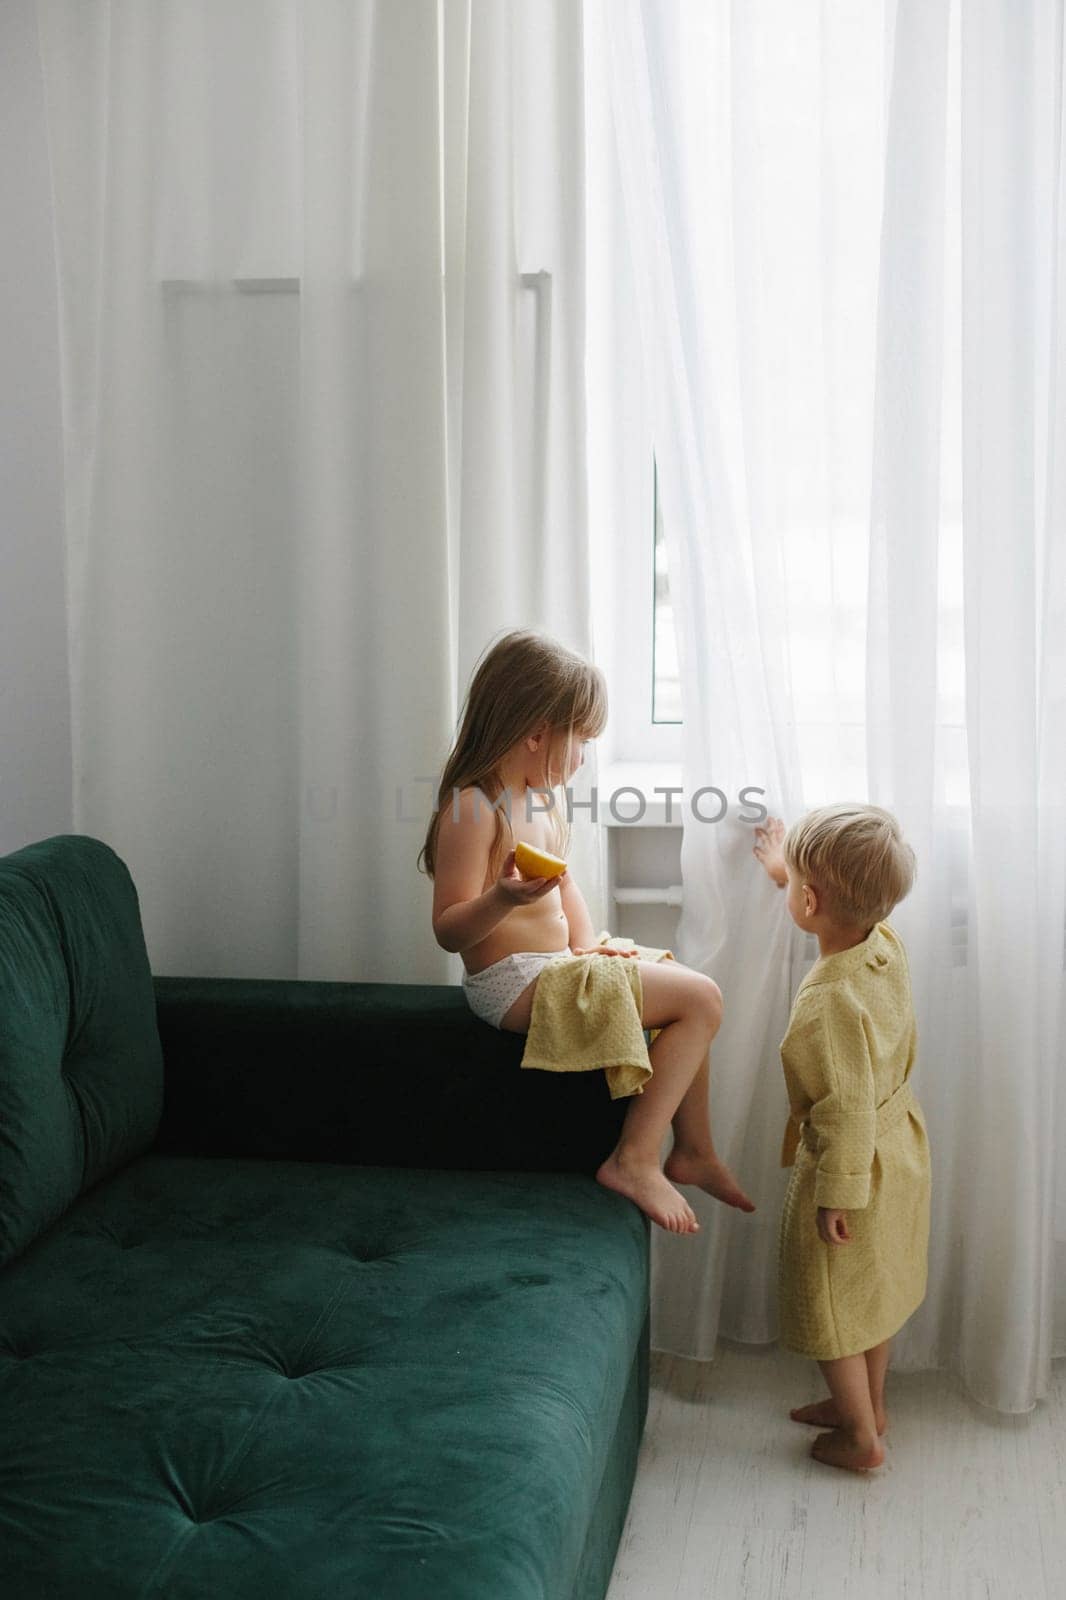 Children, a boy and a girl are resting after a bath, the girl is eating an orange.